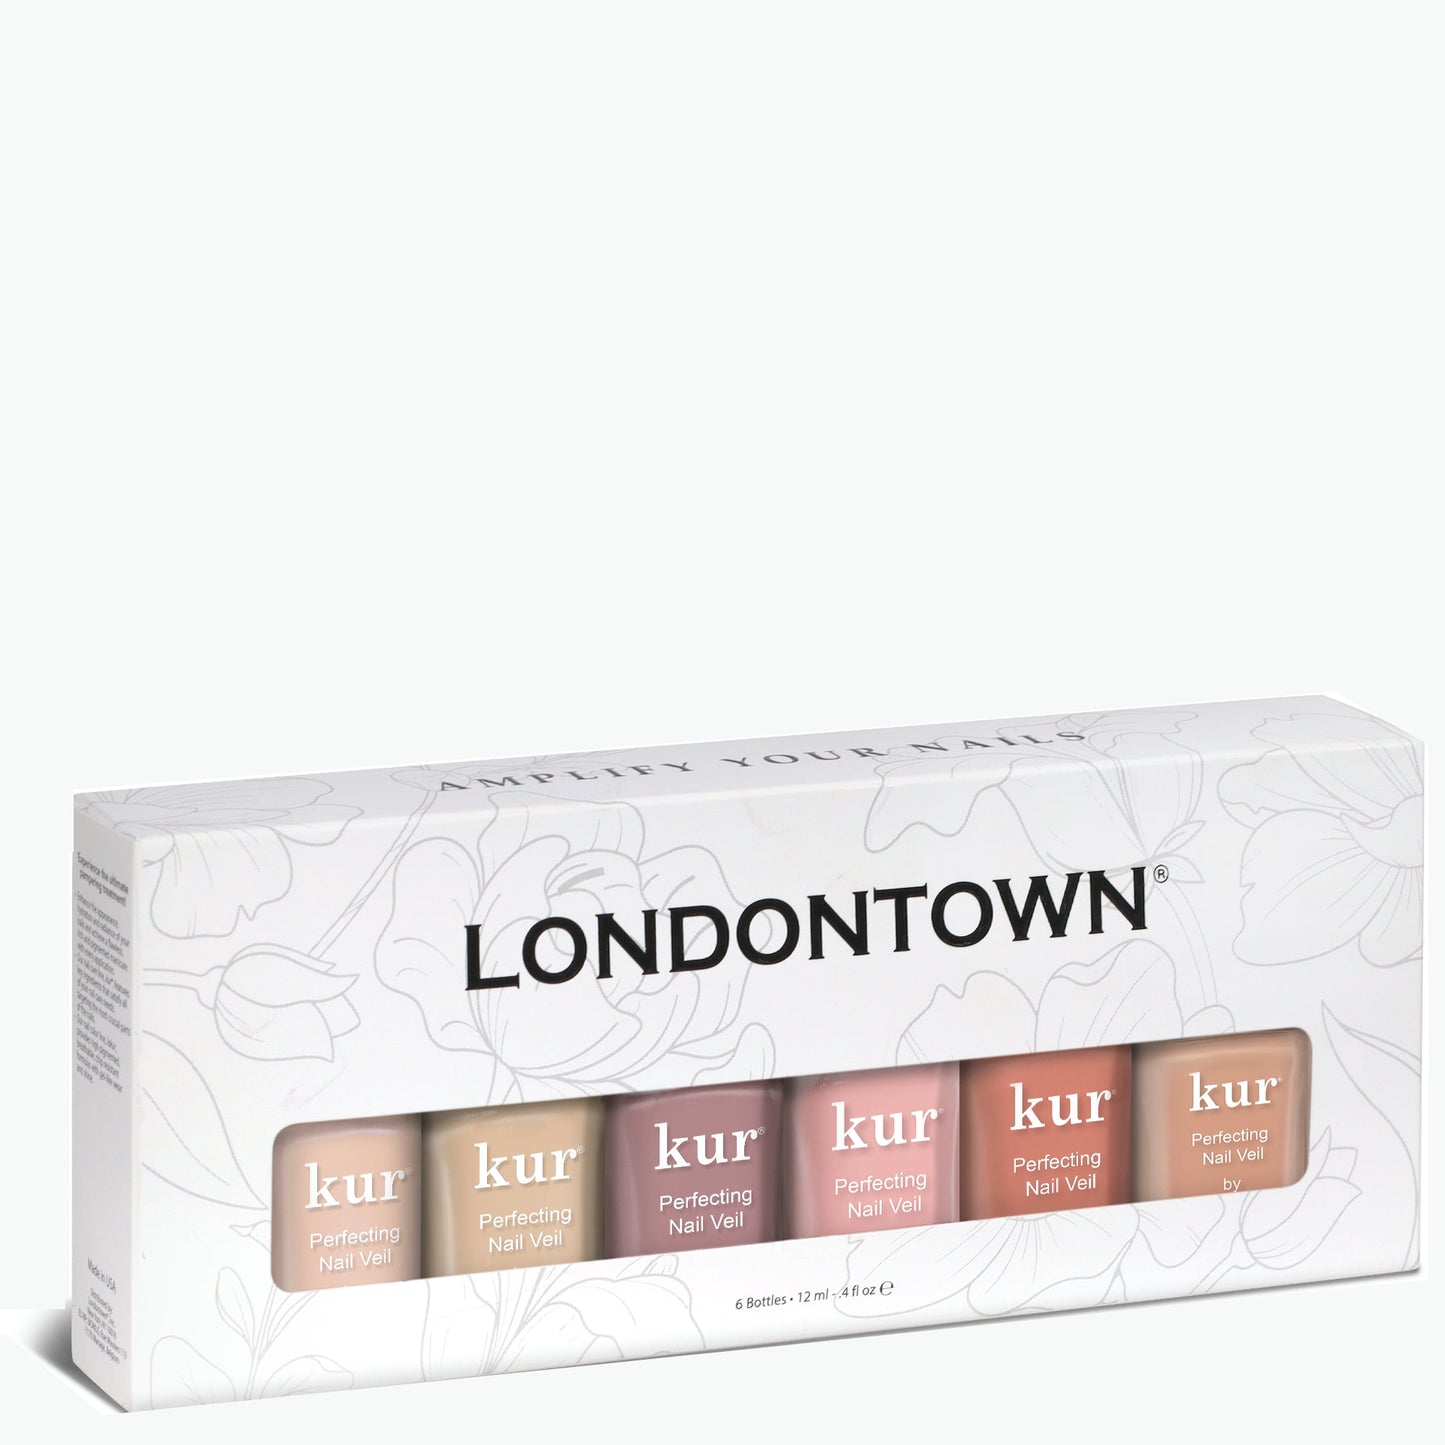 Perfecting Nail Veil Collection by LONDONTOWN